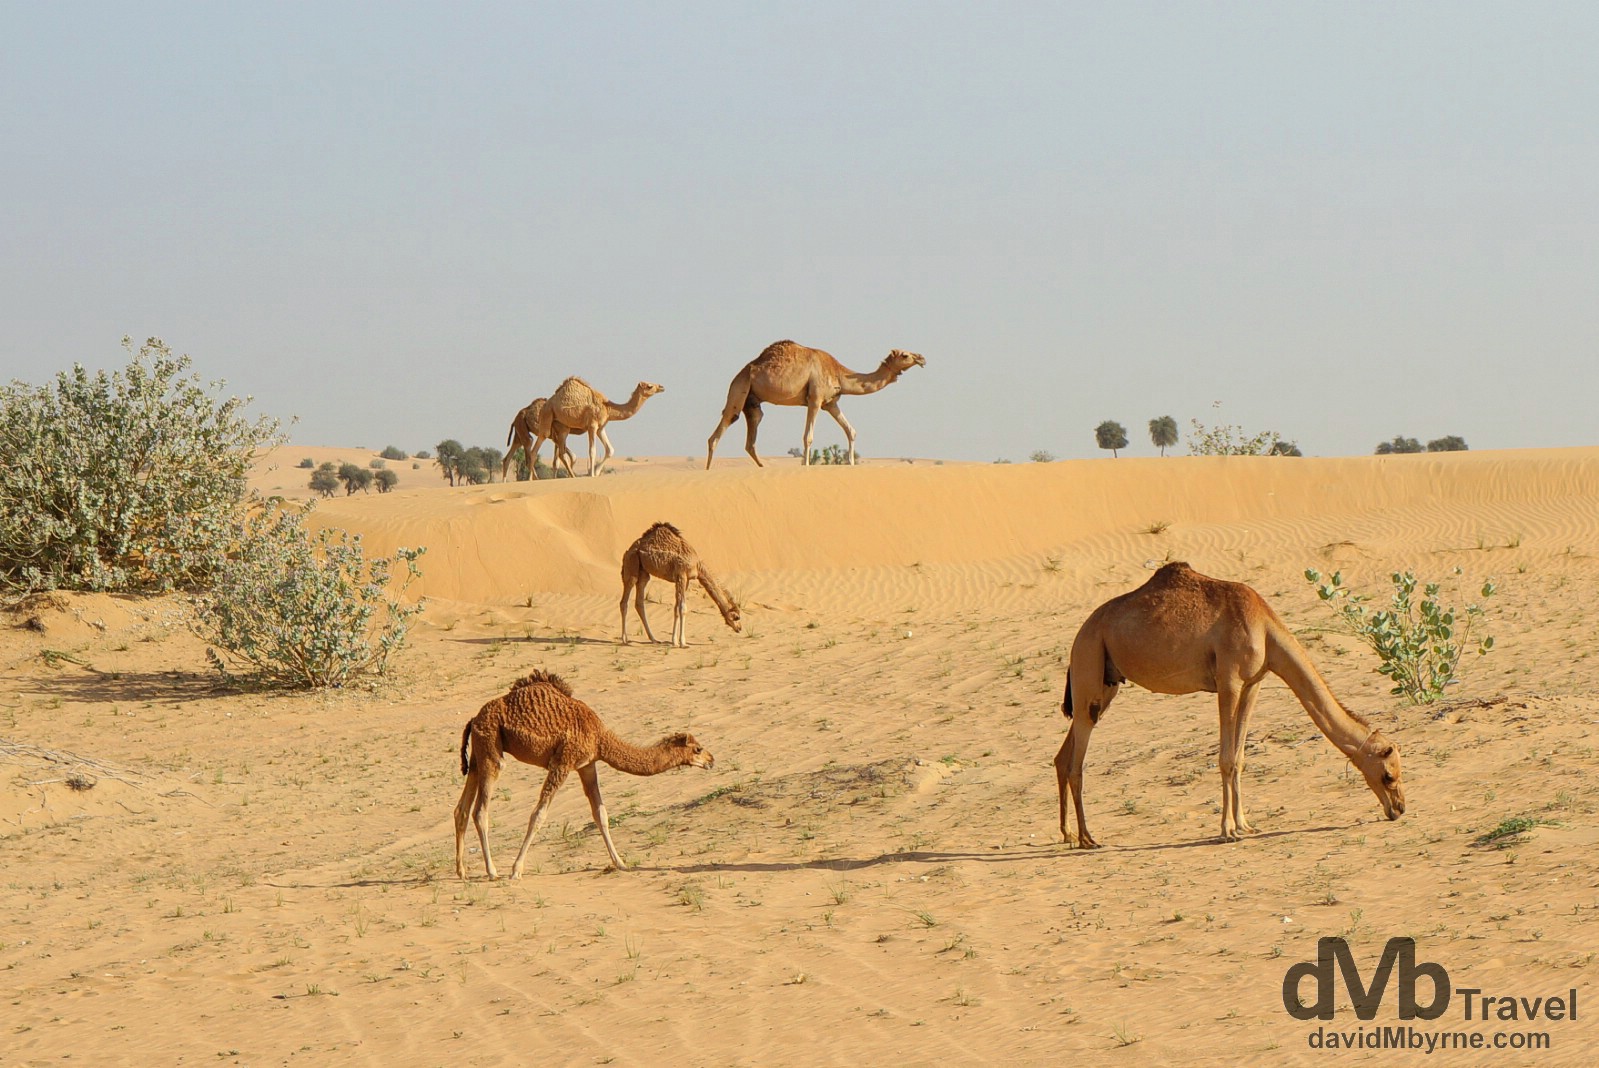 Camels on an early morning stroll in the desert outside Dubai, UAE. April 18th, 2014.